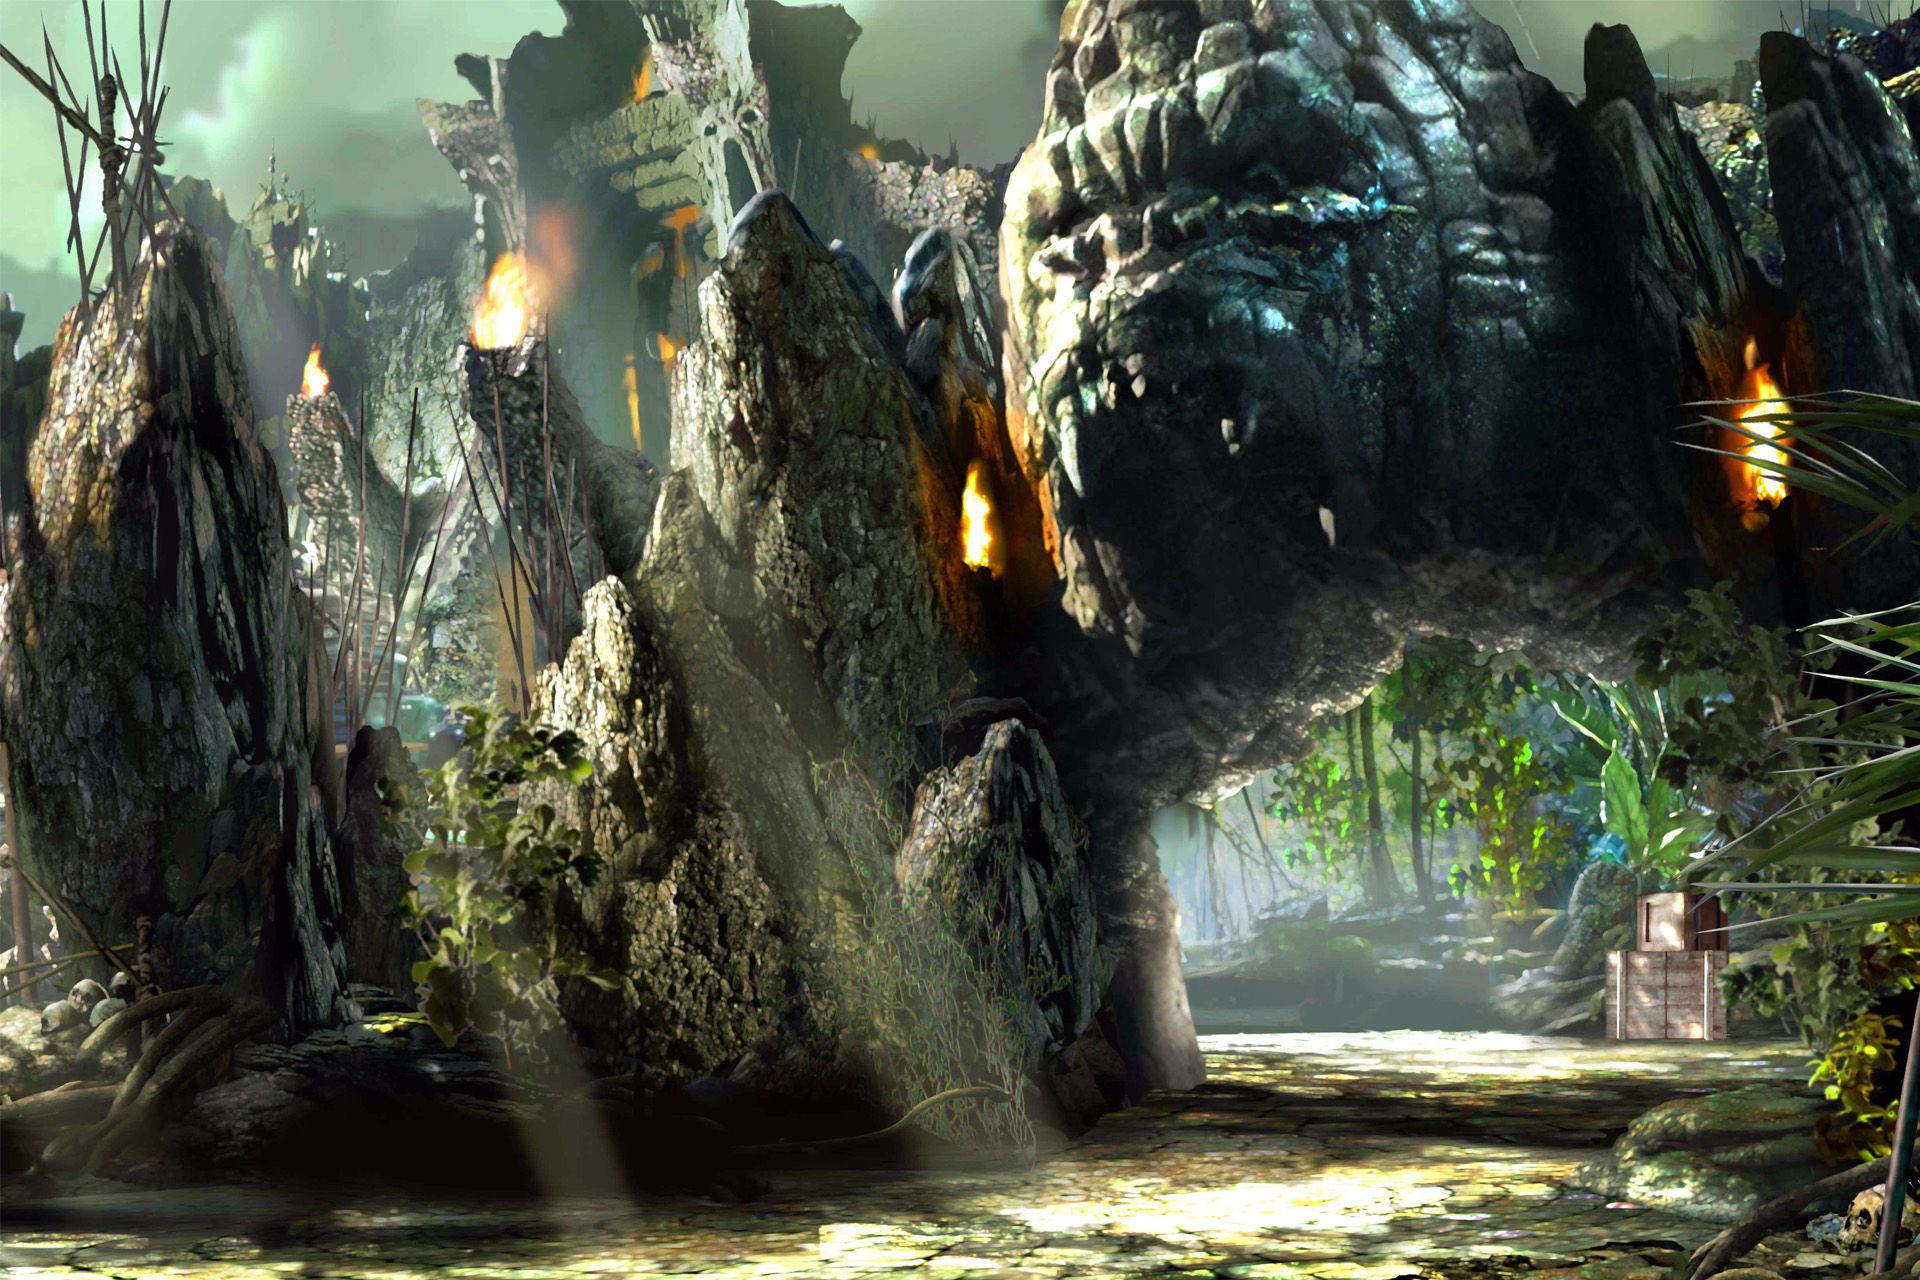 Skull Island: Reign of Kong Ride at Islands of Adventure Preview